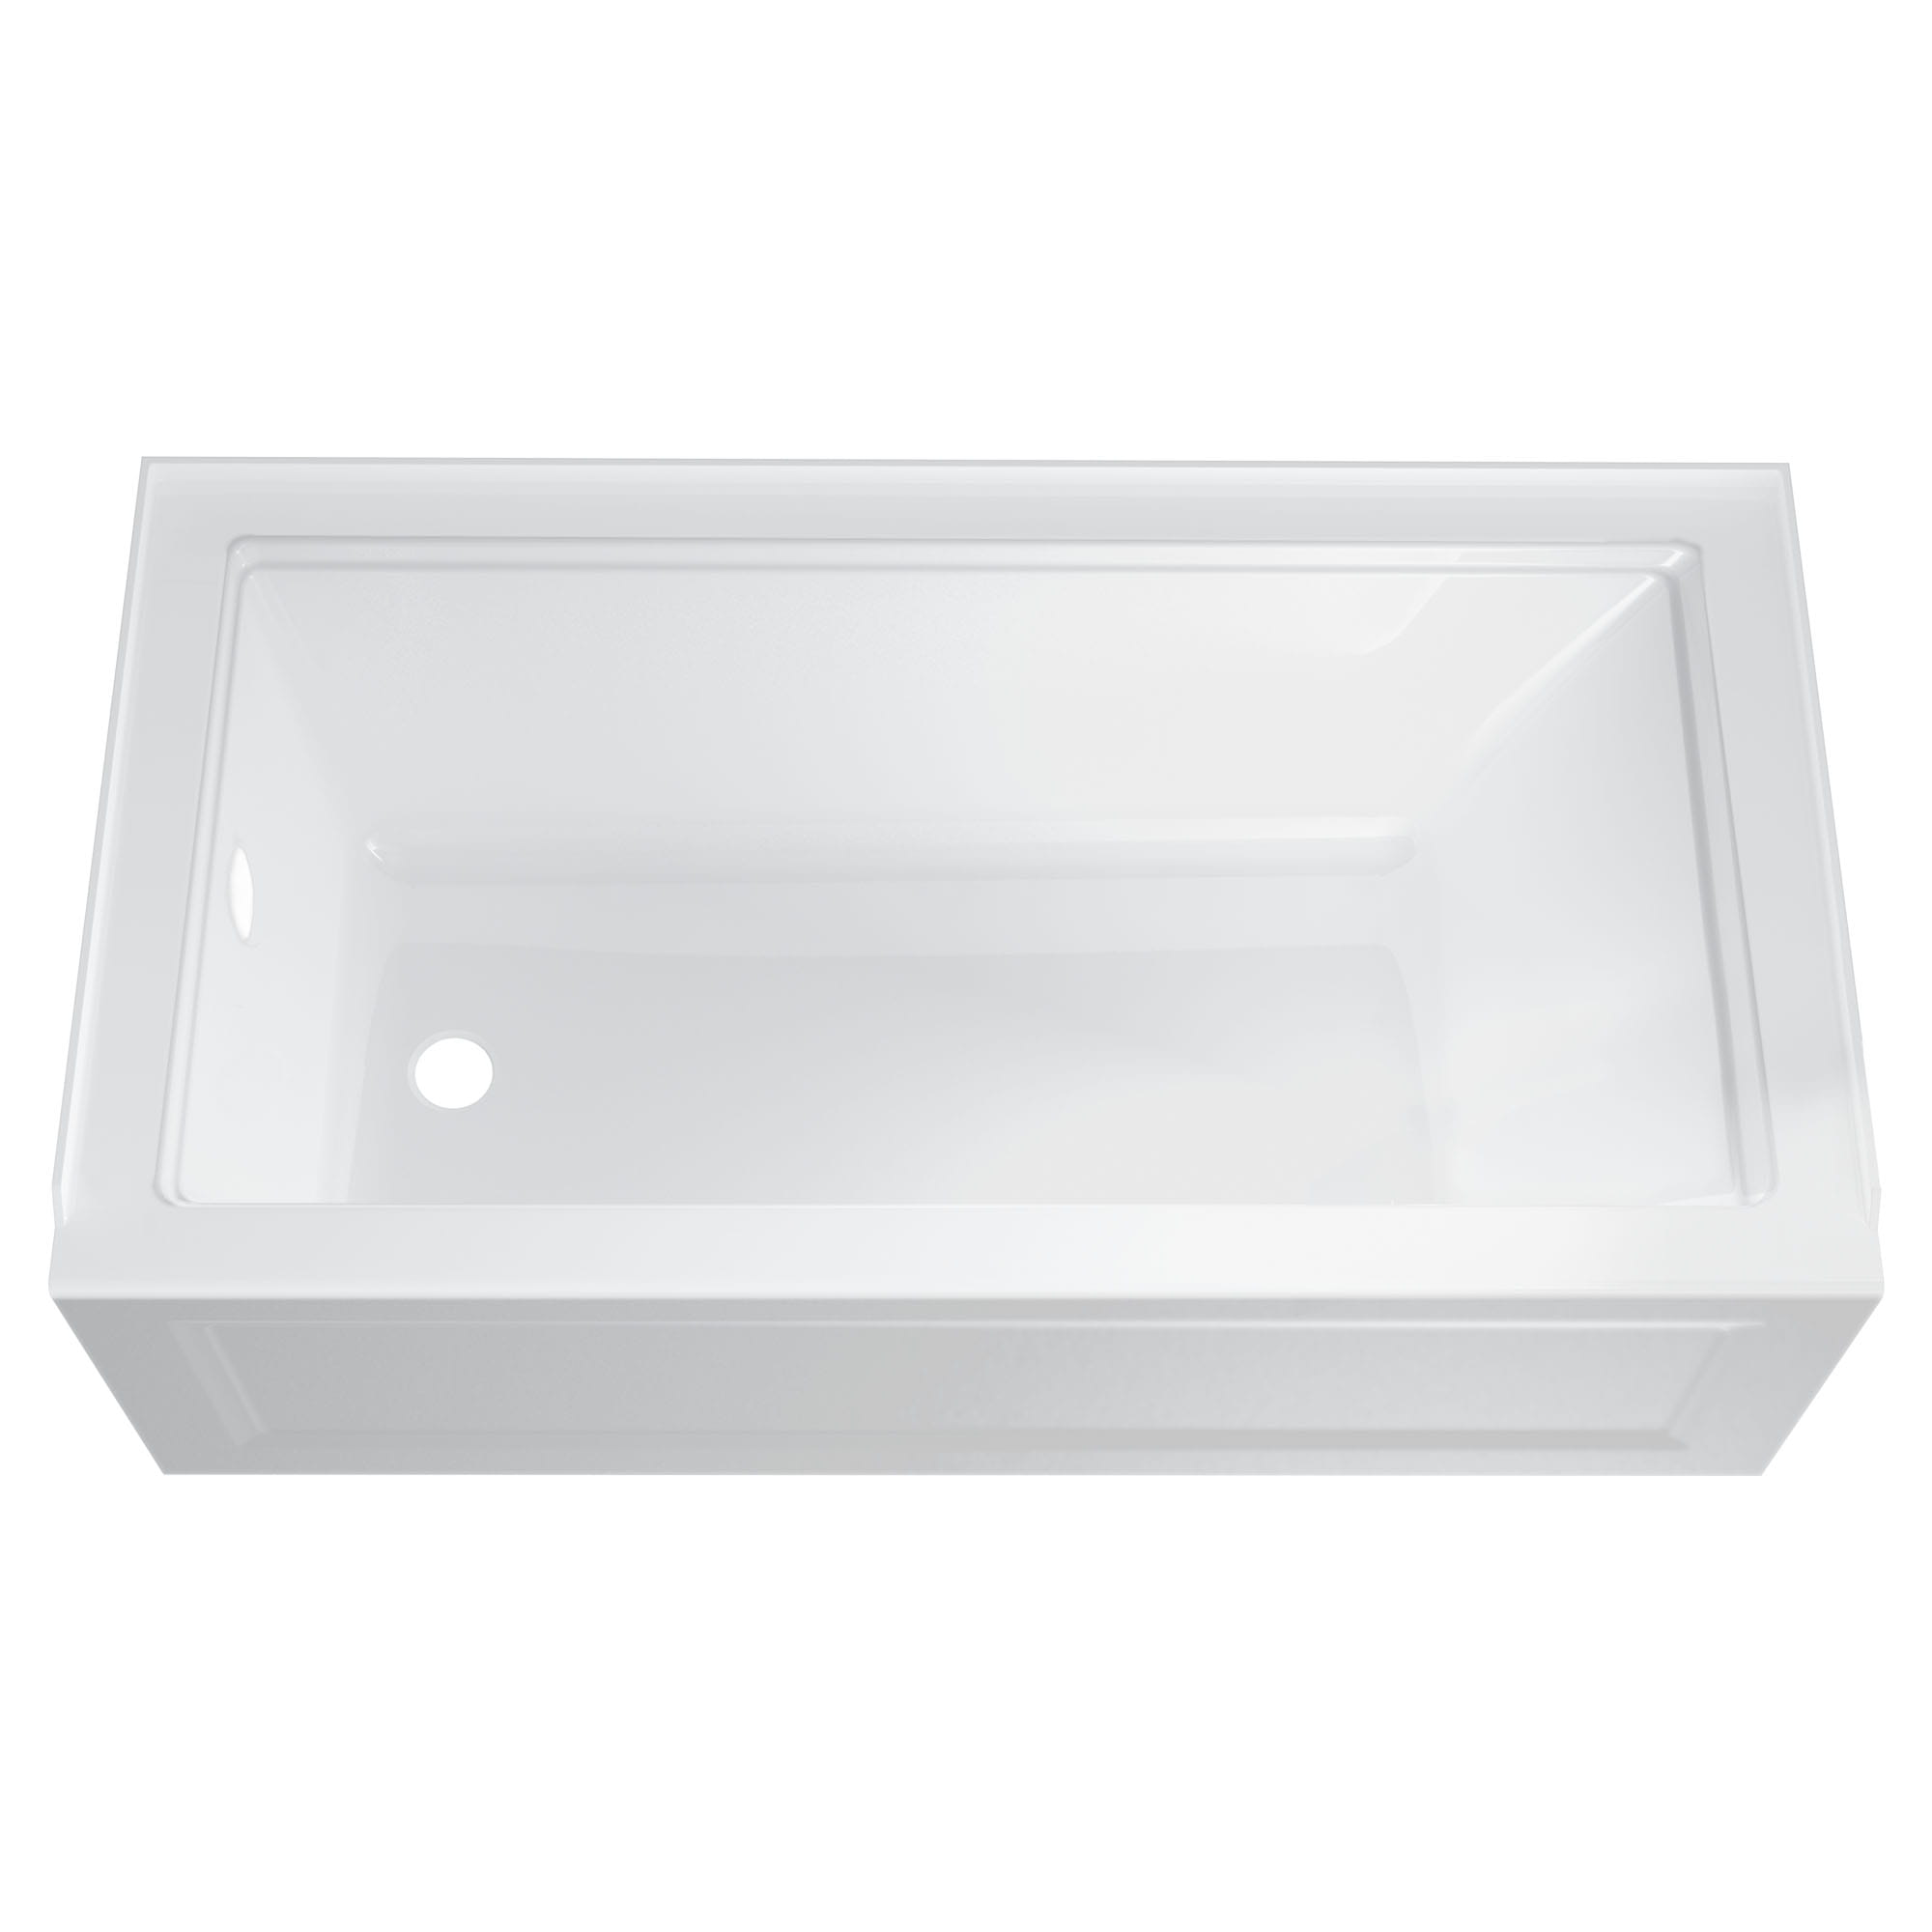 Town Square® S 60 x 30-Inch Integral Apron Bathtub With Left-Hand Outlet